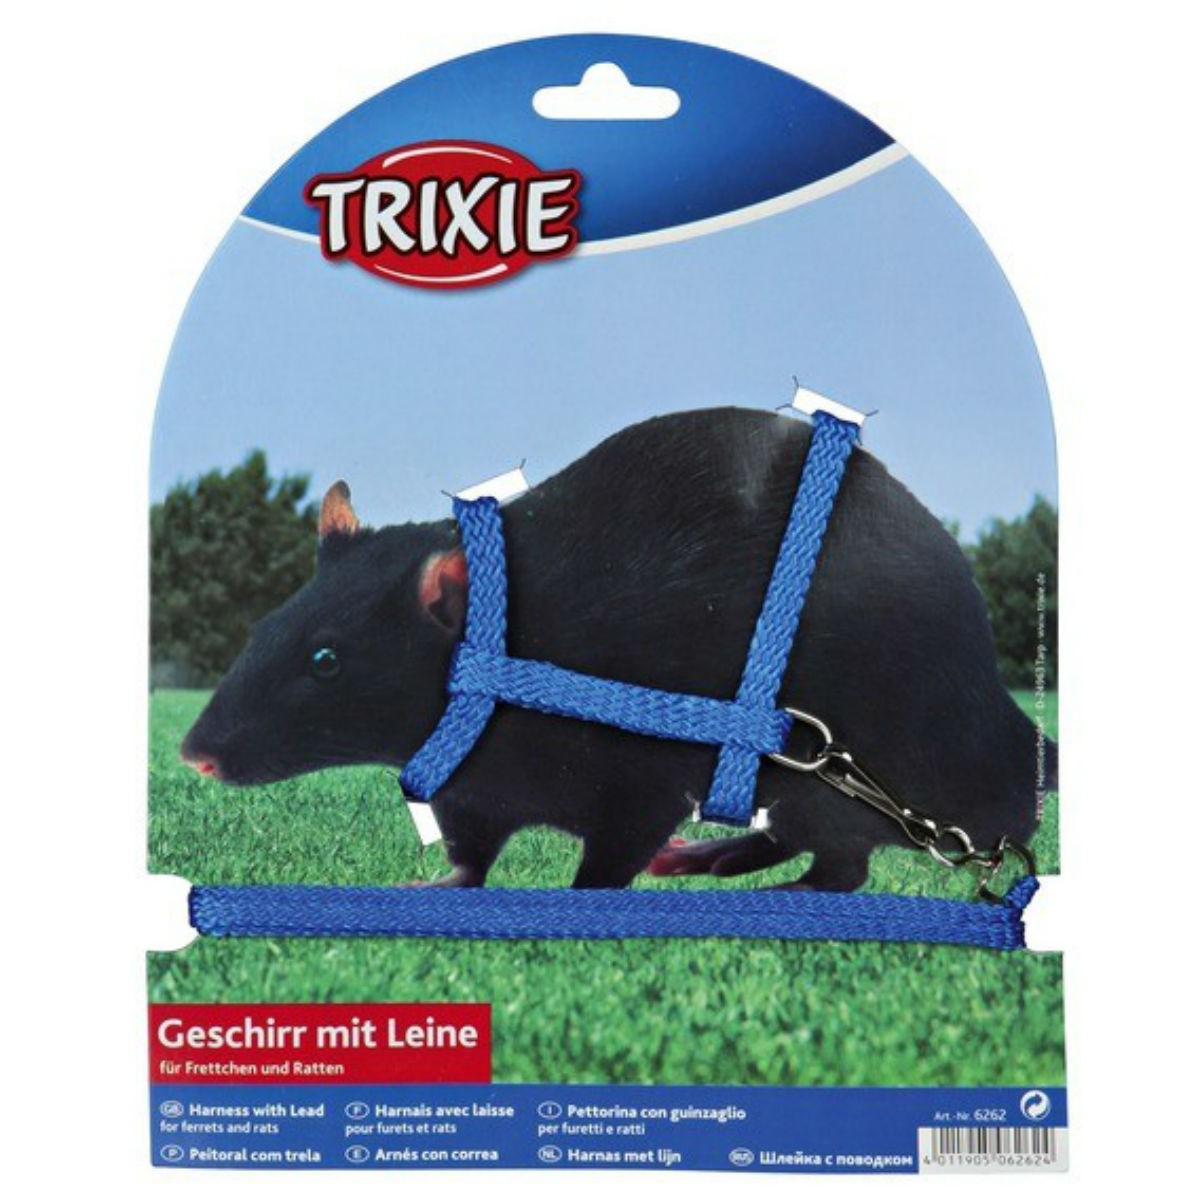 Trixie harness for rat